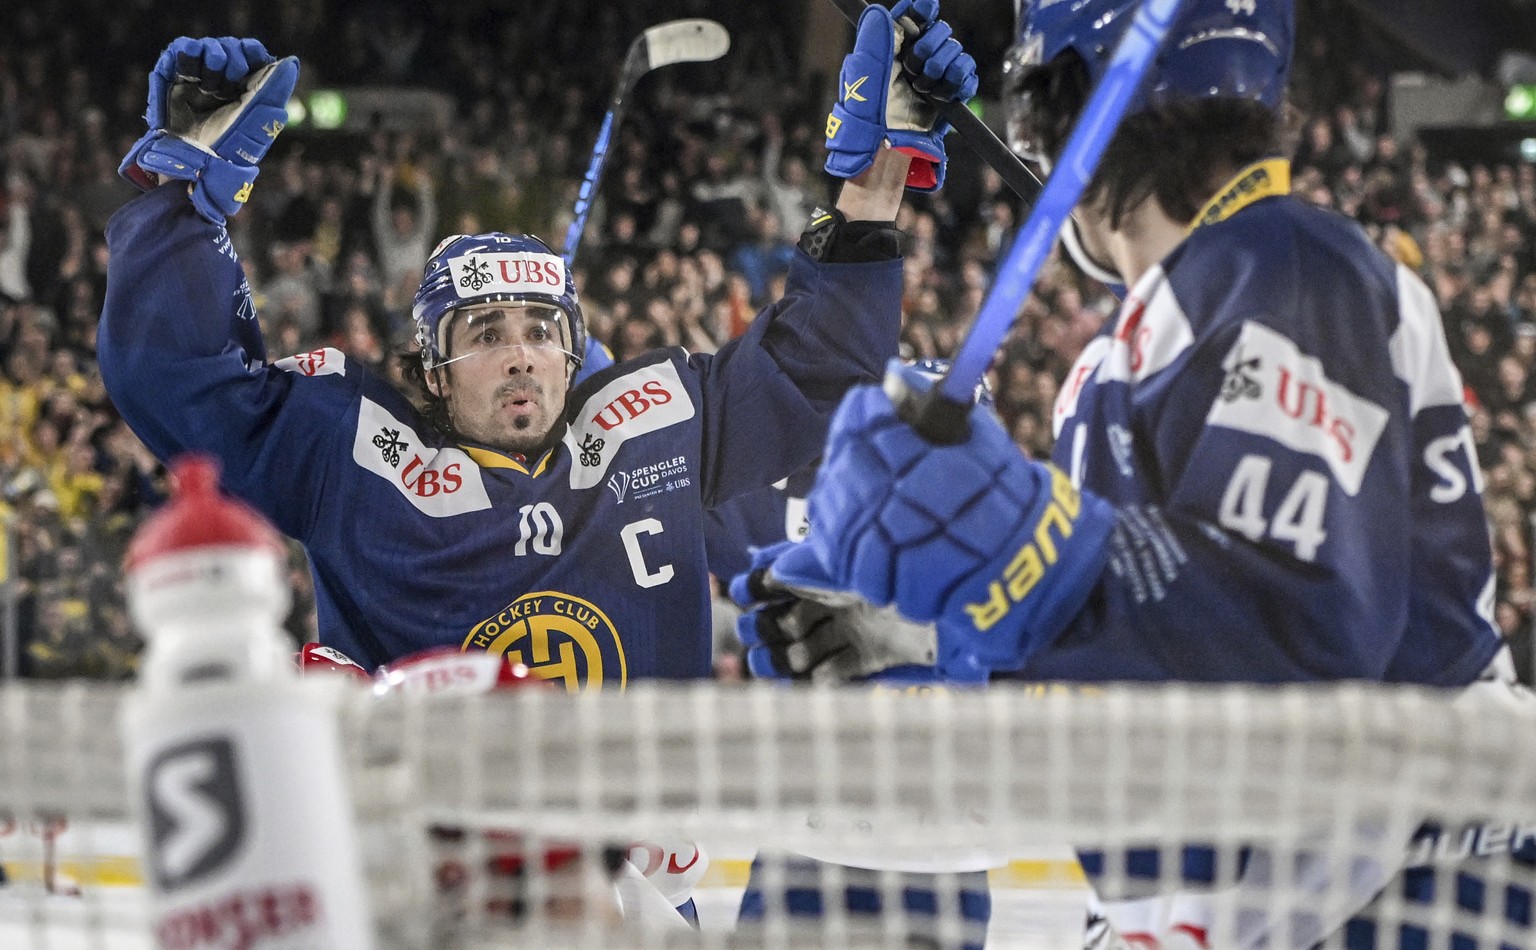 Davos&#039; Andres Ambuhl celebrate after scoring 2-1 during the game between Switzerland&#039;s HC Davos and Finland&#039;s IFK Helsinki, at the 94th Spengler Cup ice hockey tournament in Davos, Swit ...